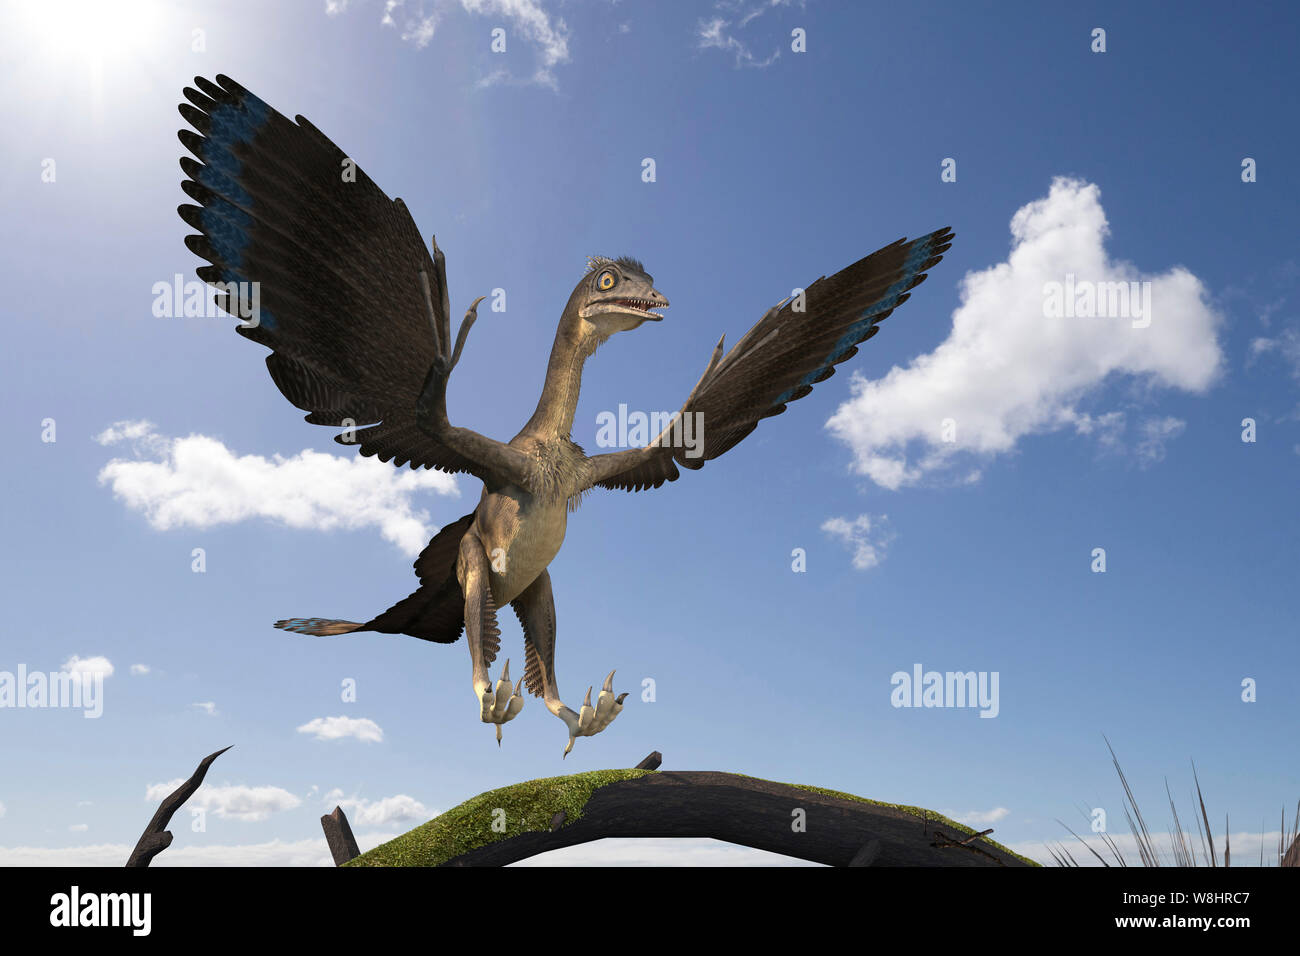 Archaeopteryx dinosaur, illustration. These bird like dinosaurs lived about 150 million years ago during the late Jurassic period. Stock Photo